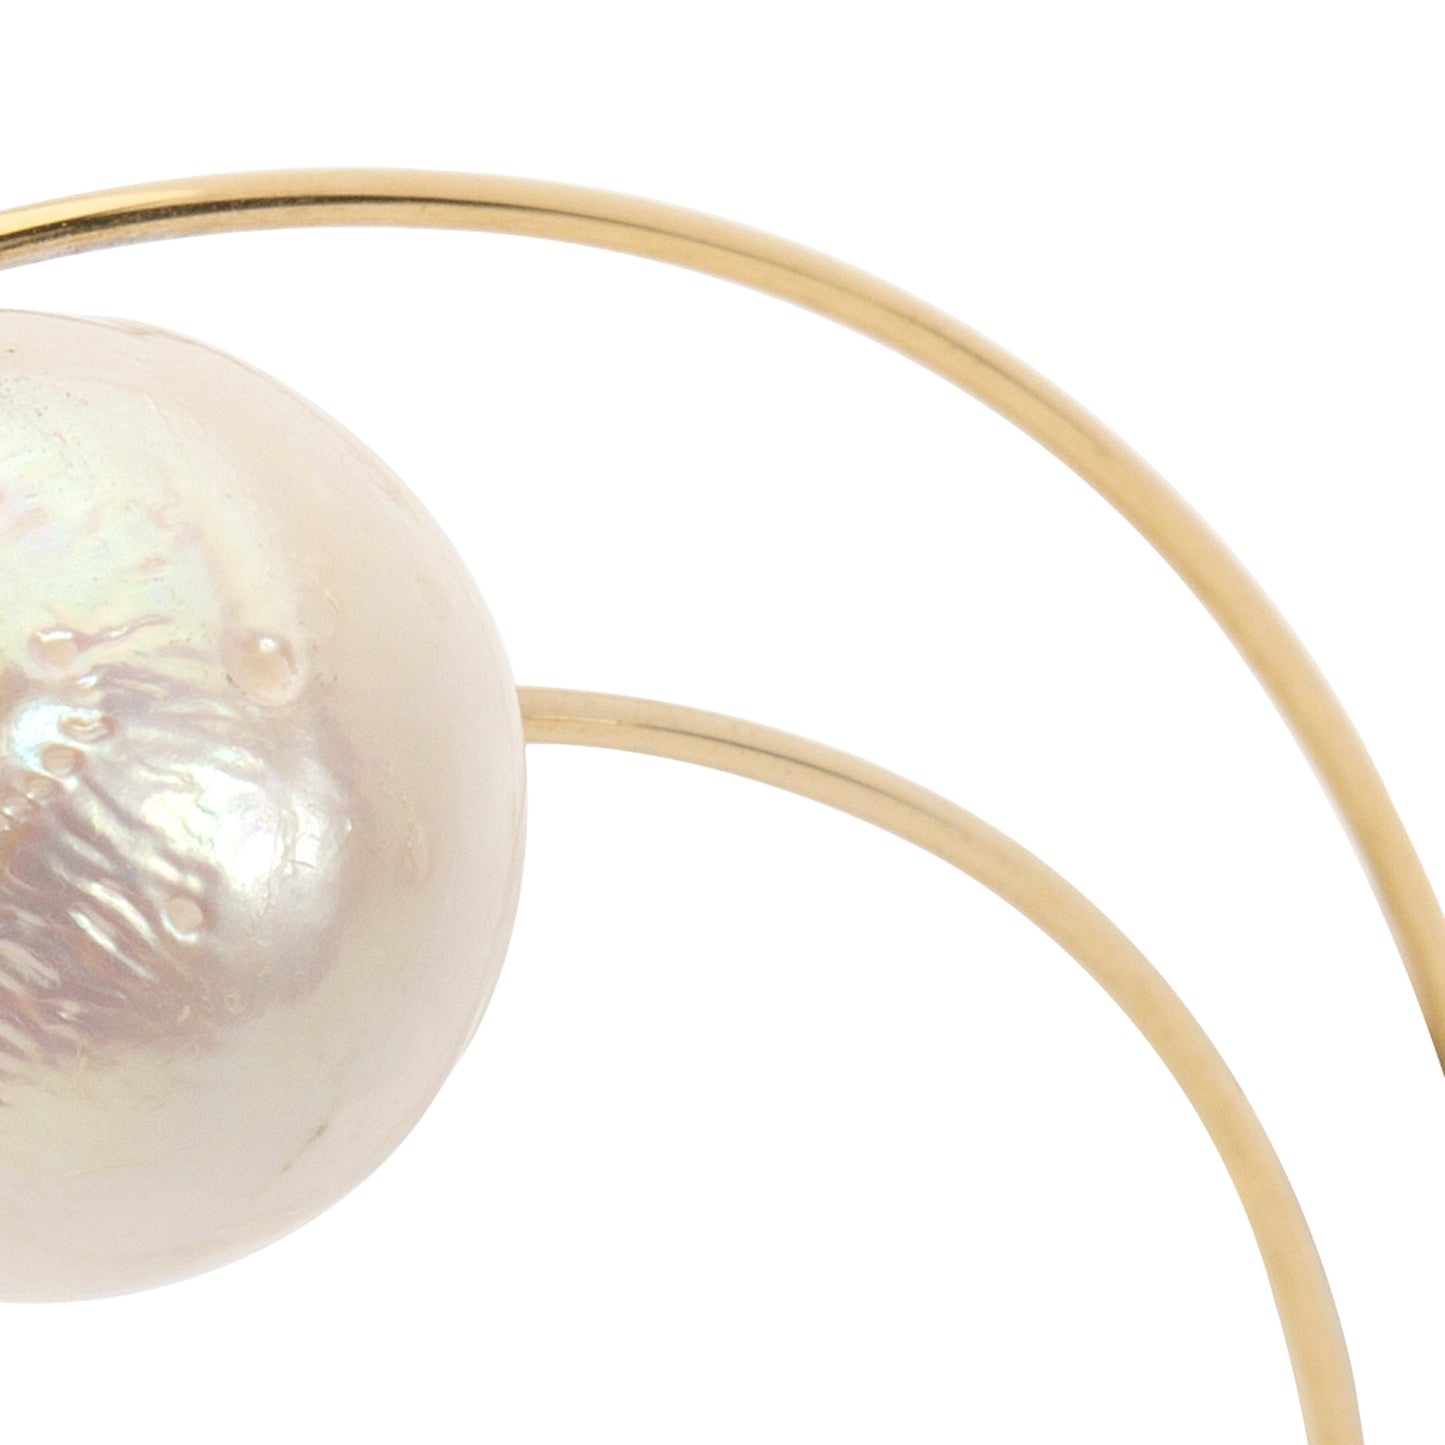 Circle Wrap Bangle with Large Round Freshwater Pearl